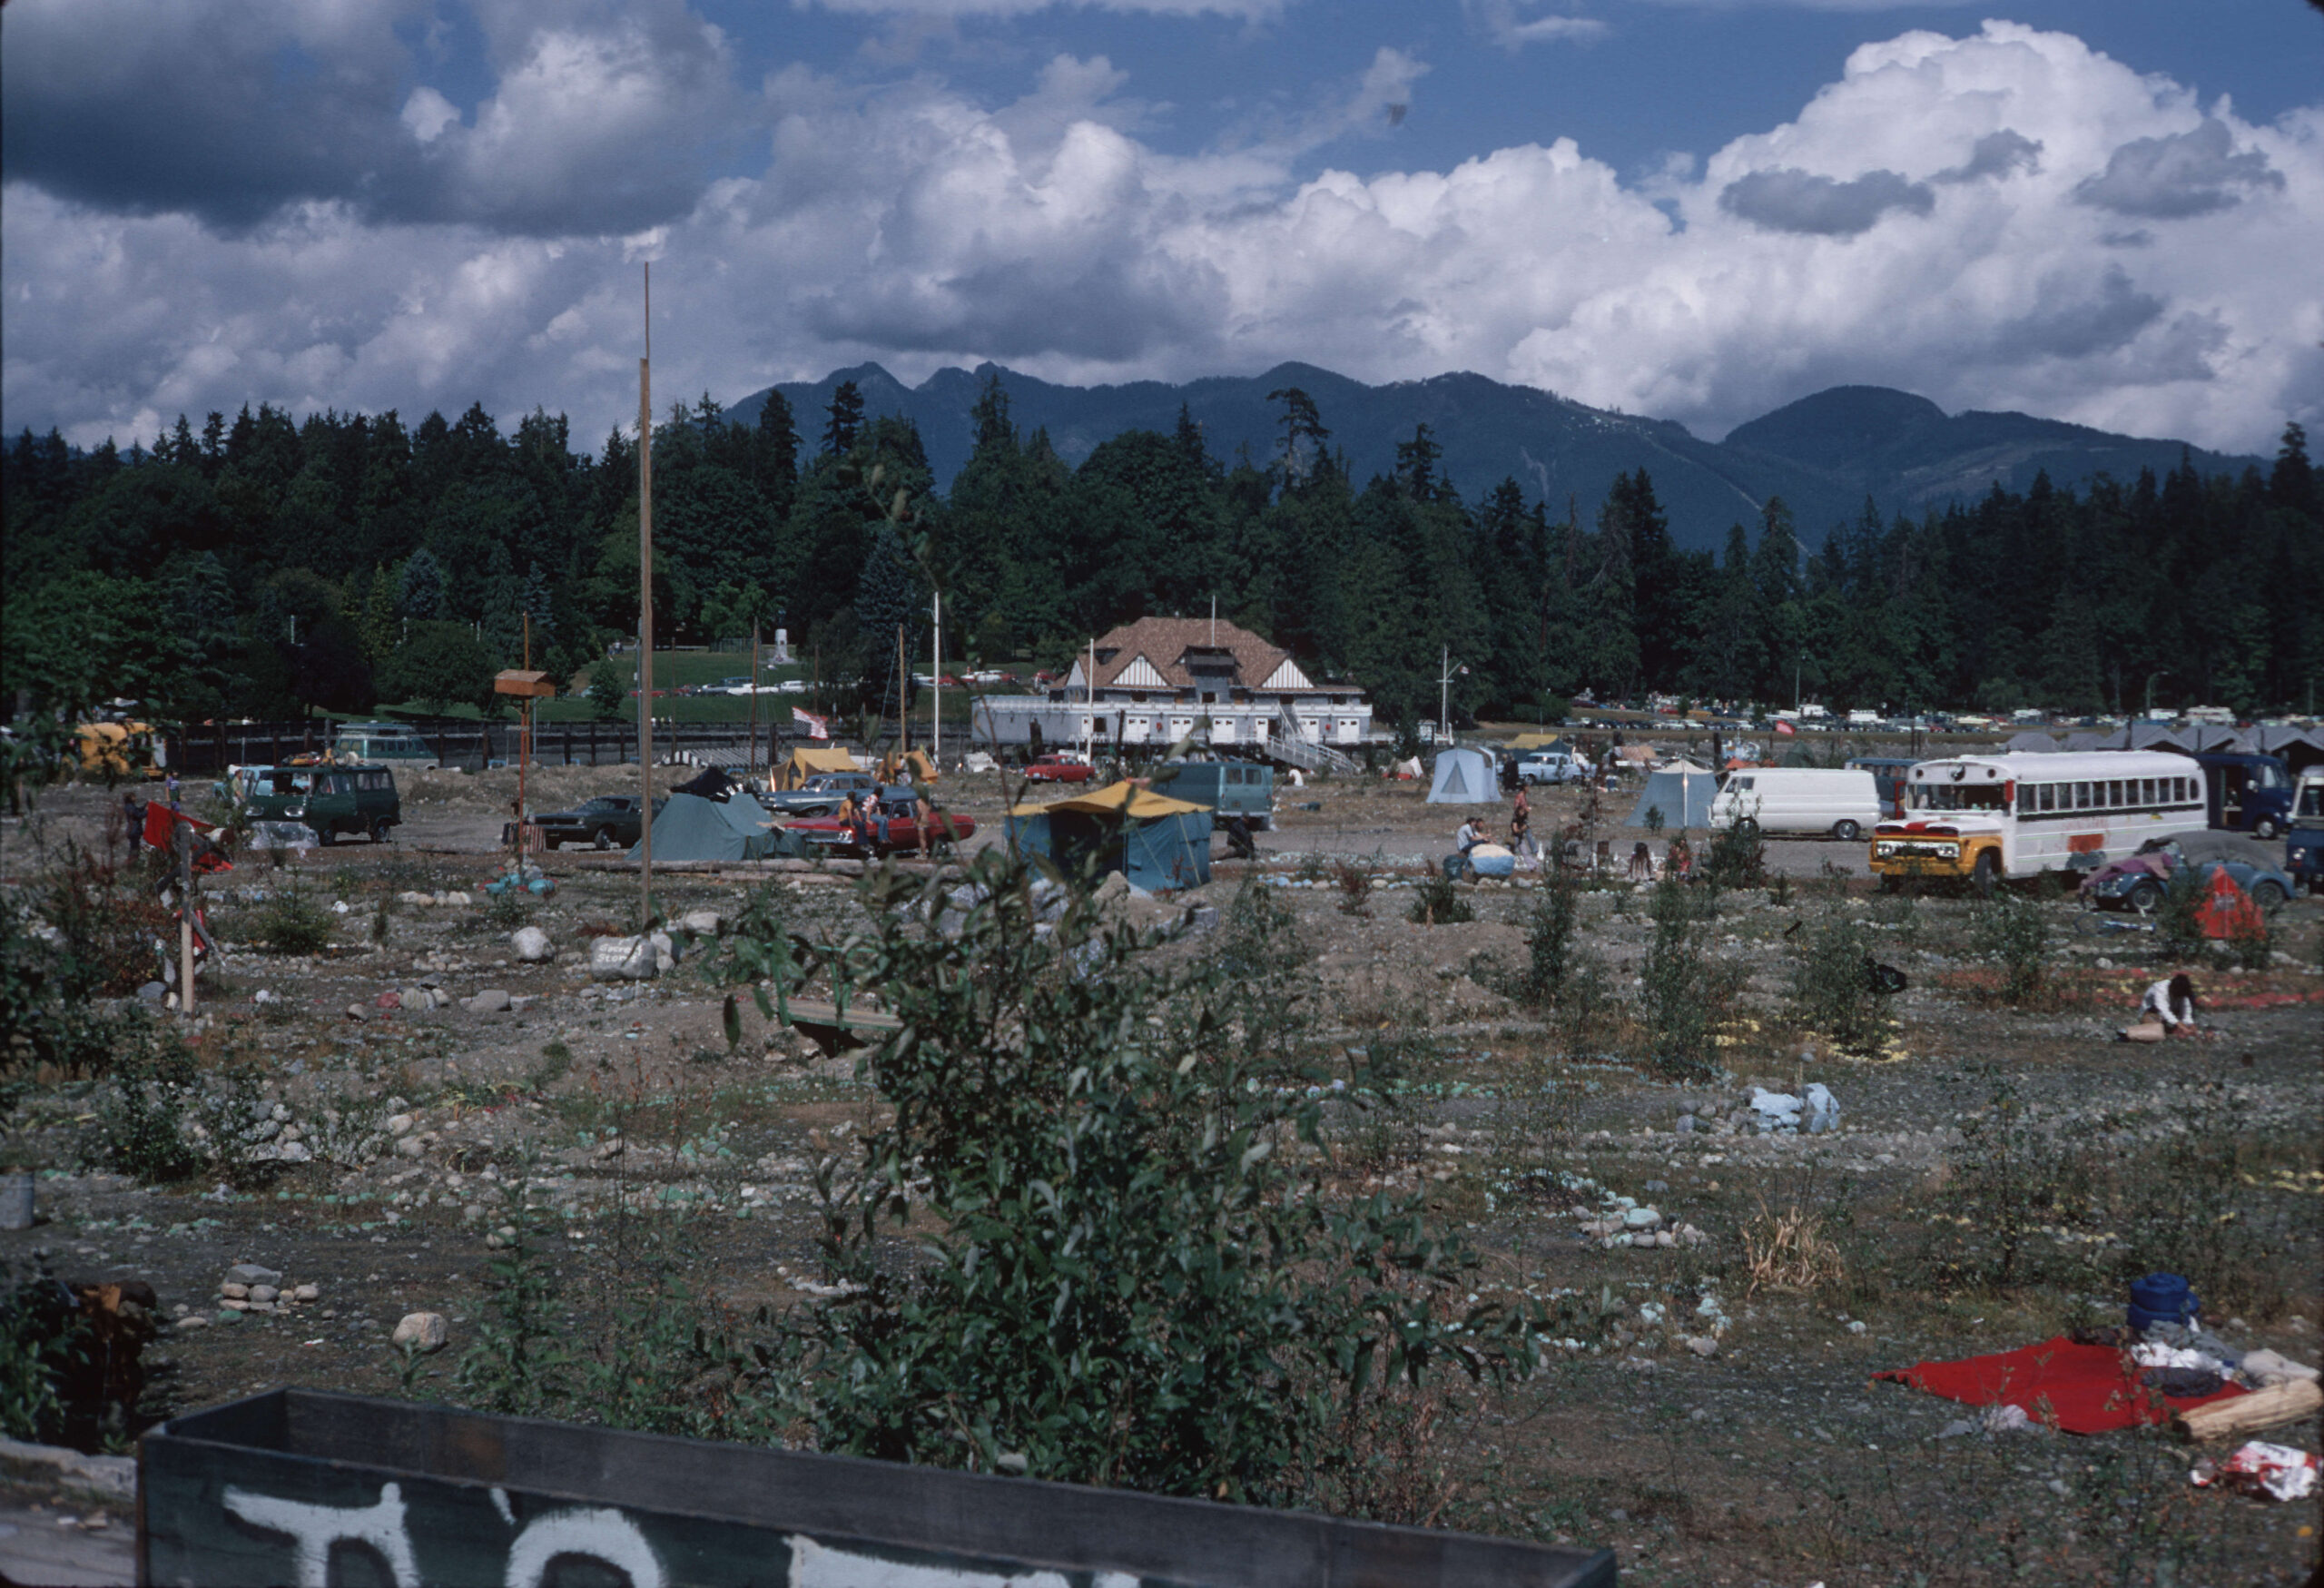 The “All Seasons Park” squat camp, Aug. 1971. Reference code: AM1376-: 2016-046.01